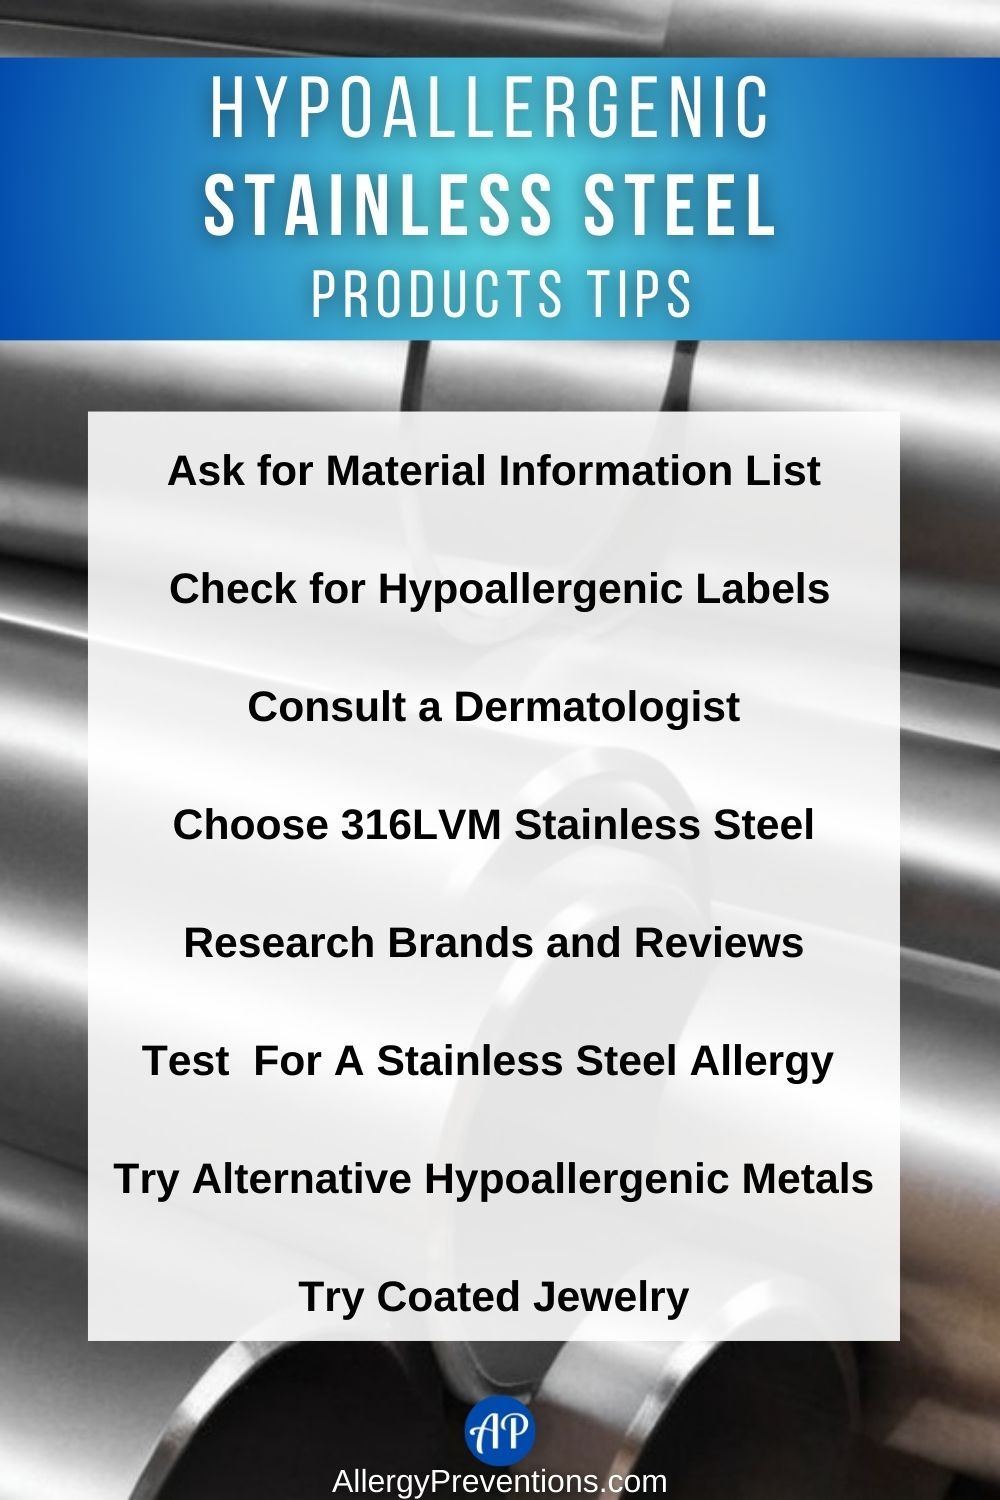 Hypoallergenic stainless steel products tips infographic. Ask for Material Information List, Check for Hypoallergenic Labels, Consult a, Dermatologist, Choose 316LVM Stainless Steel, Research Brands and Reviews, Test For, A Stainless Steel Allergy , Try Alternative Hypoallergenic Metals, and Try Coated Jewelry.